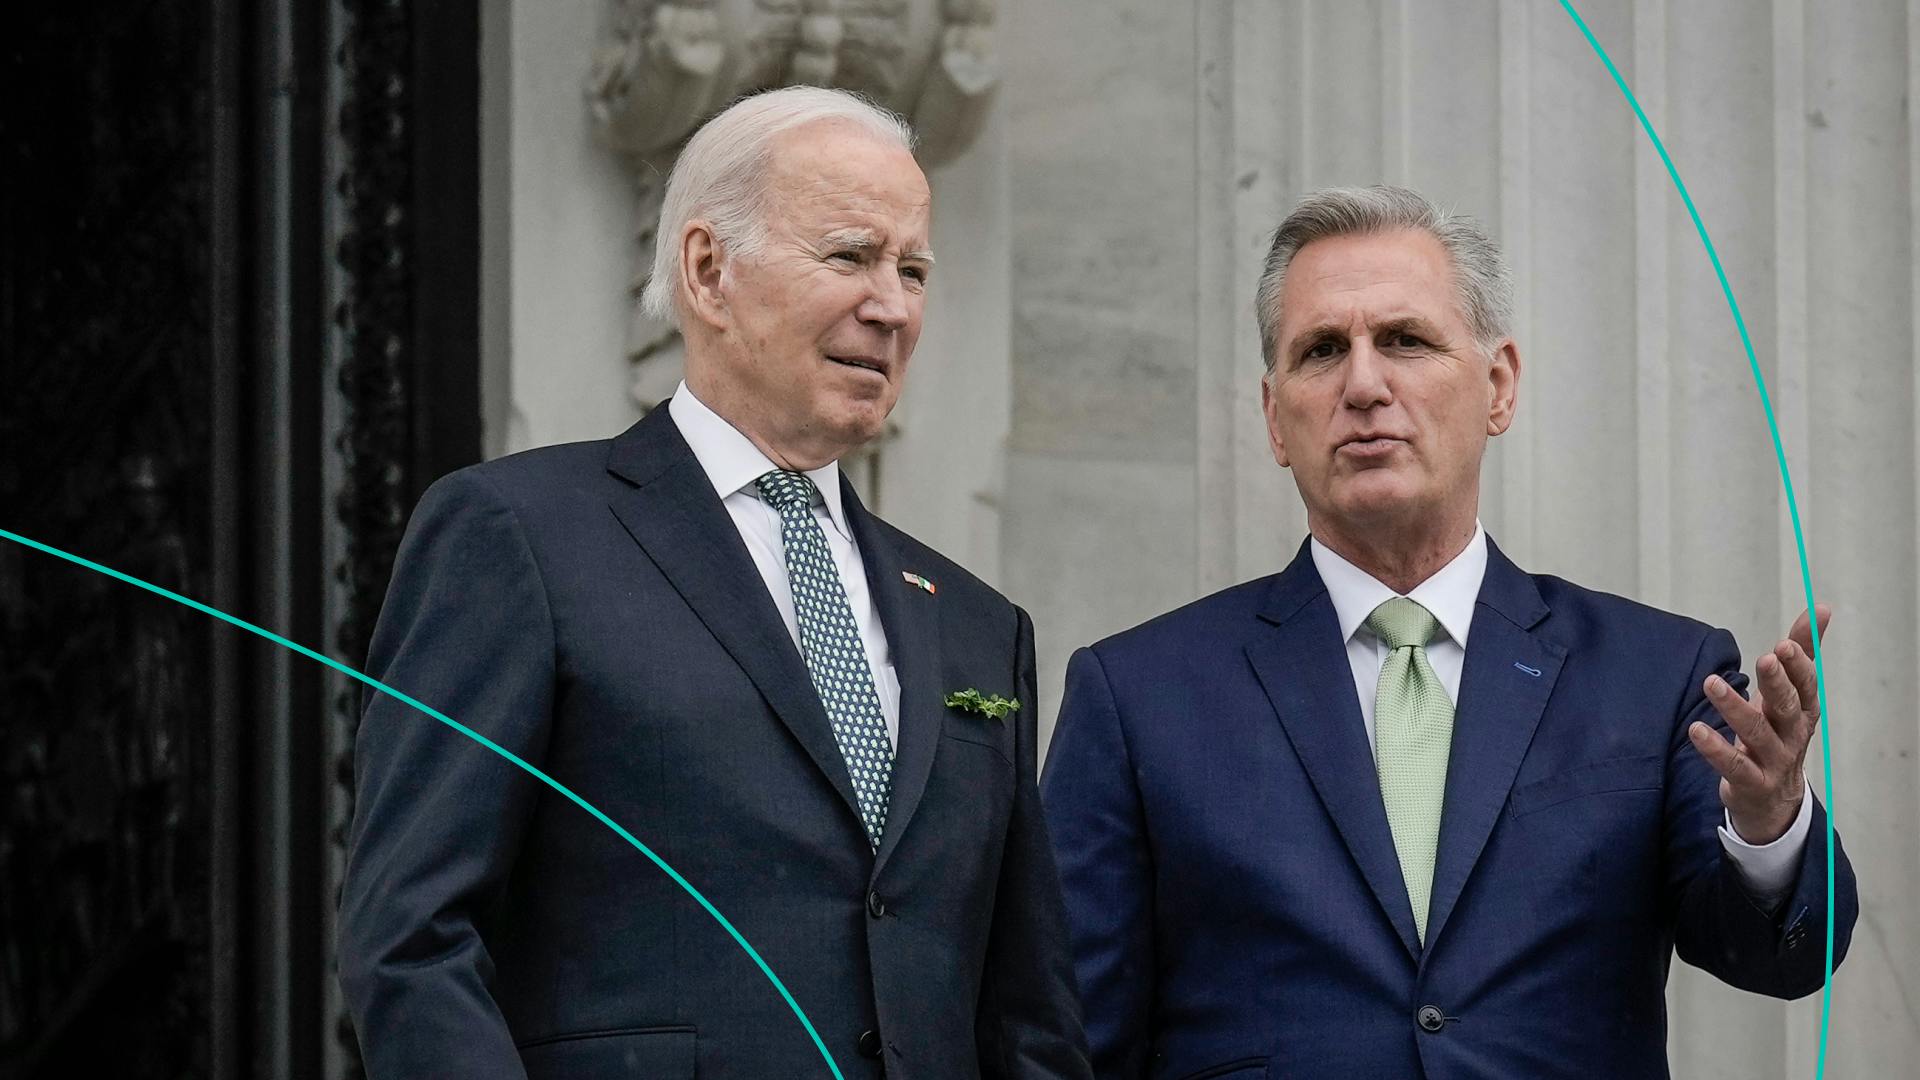 U.S. President Joe Biden and Speaker of the House Kevin McCarthy (R-CA) talk as they depart the U.S. Capitol f